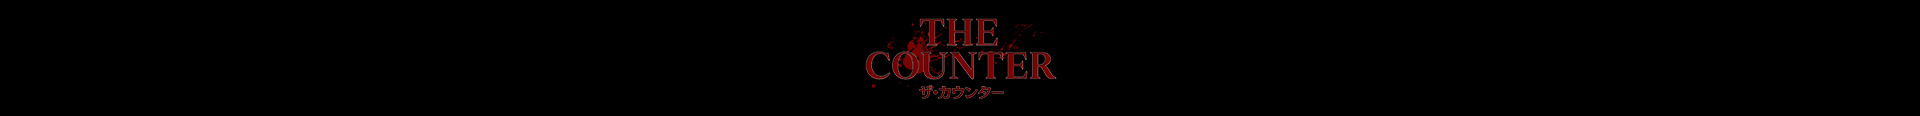 THE_COUNTER